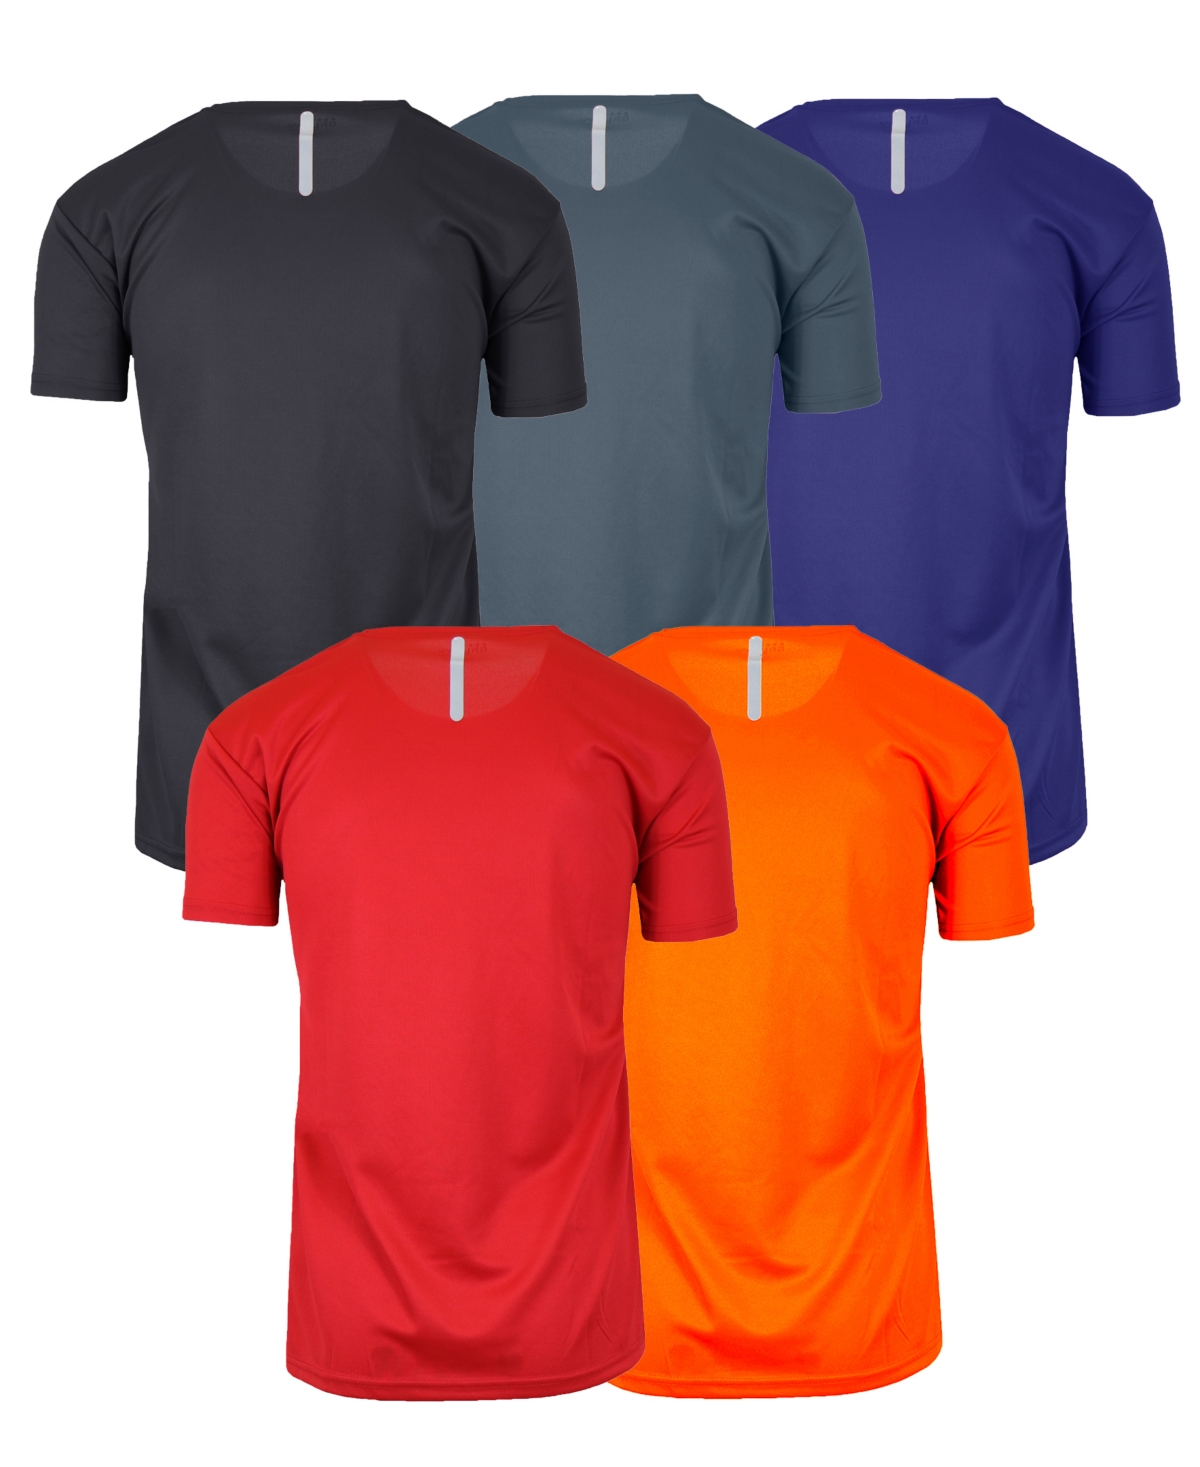 Shop Galaxy By Harvic Men's Short Sleeve Moisture-wicking Quick Dry Performance Crew Neck Tee -5 Pack In Black Multi